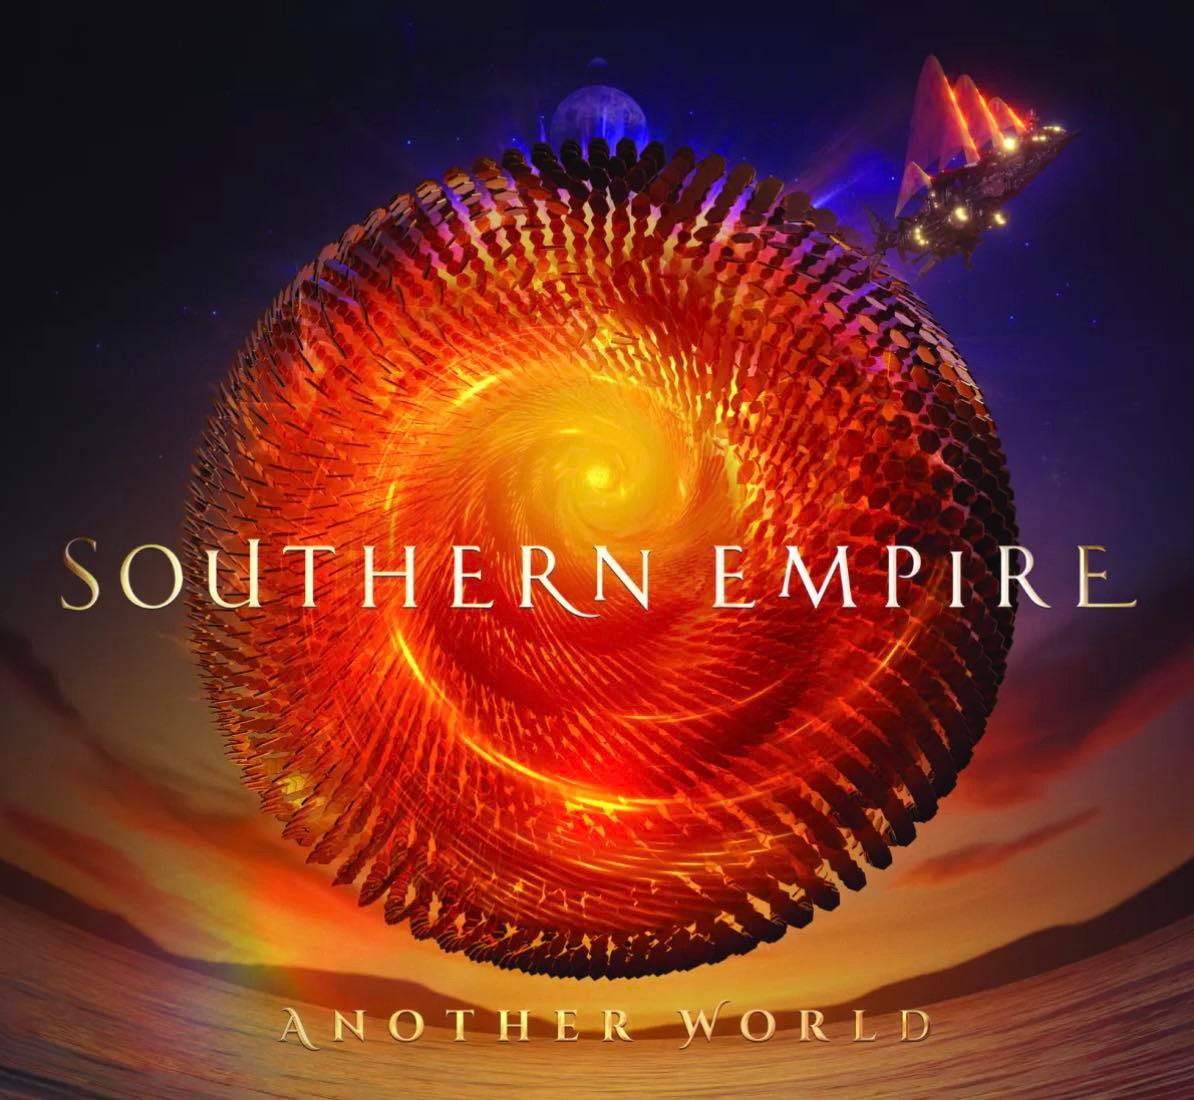 Another world - SOUTHERN EMPIRE